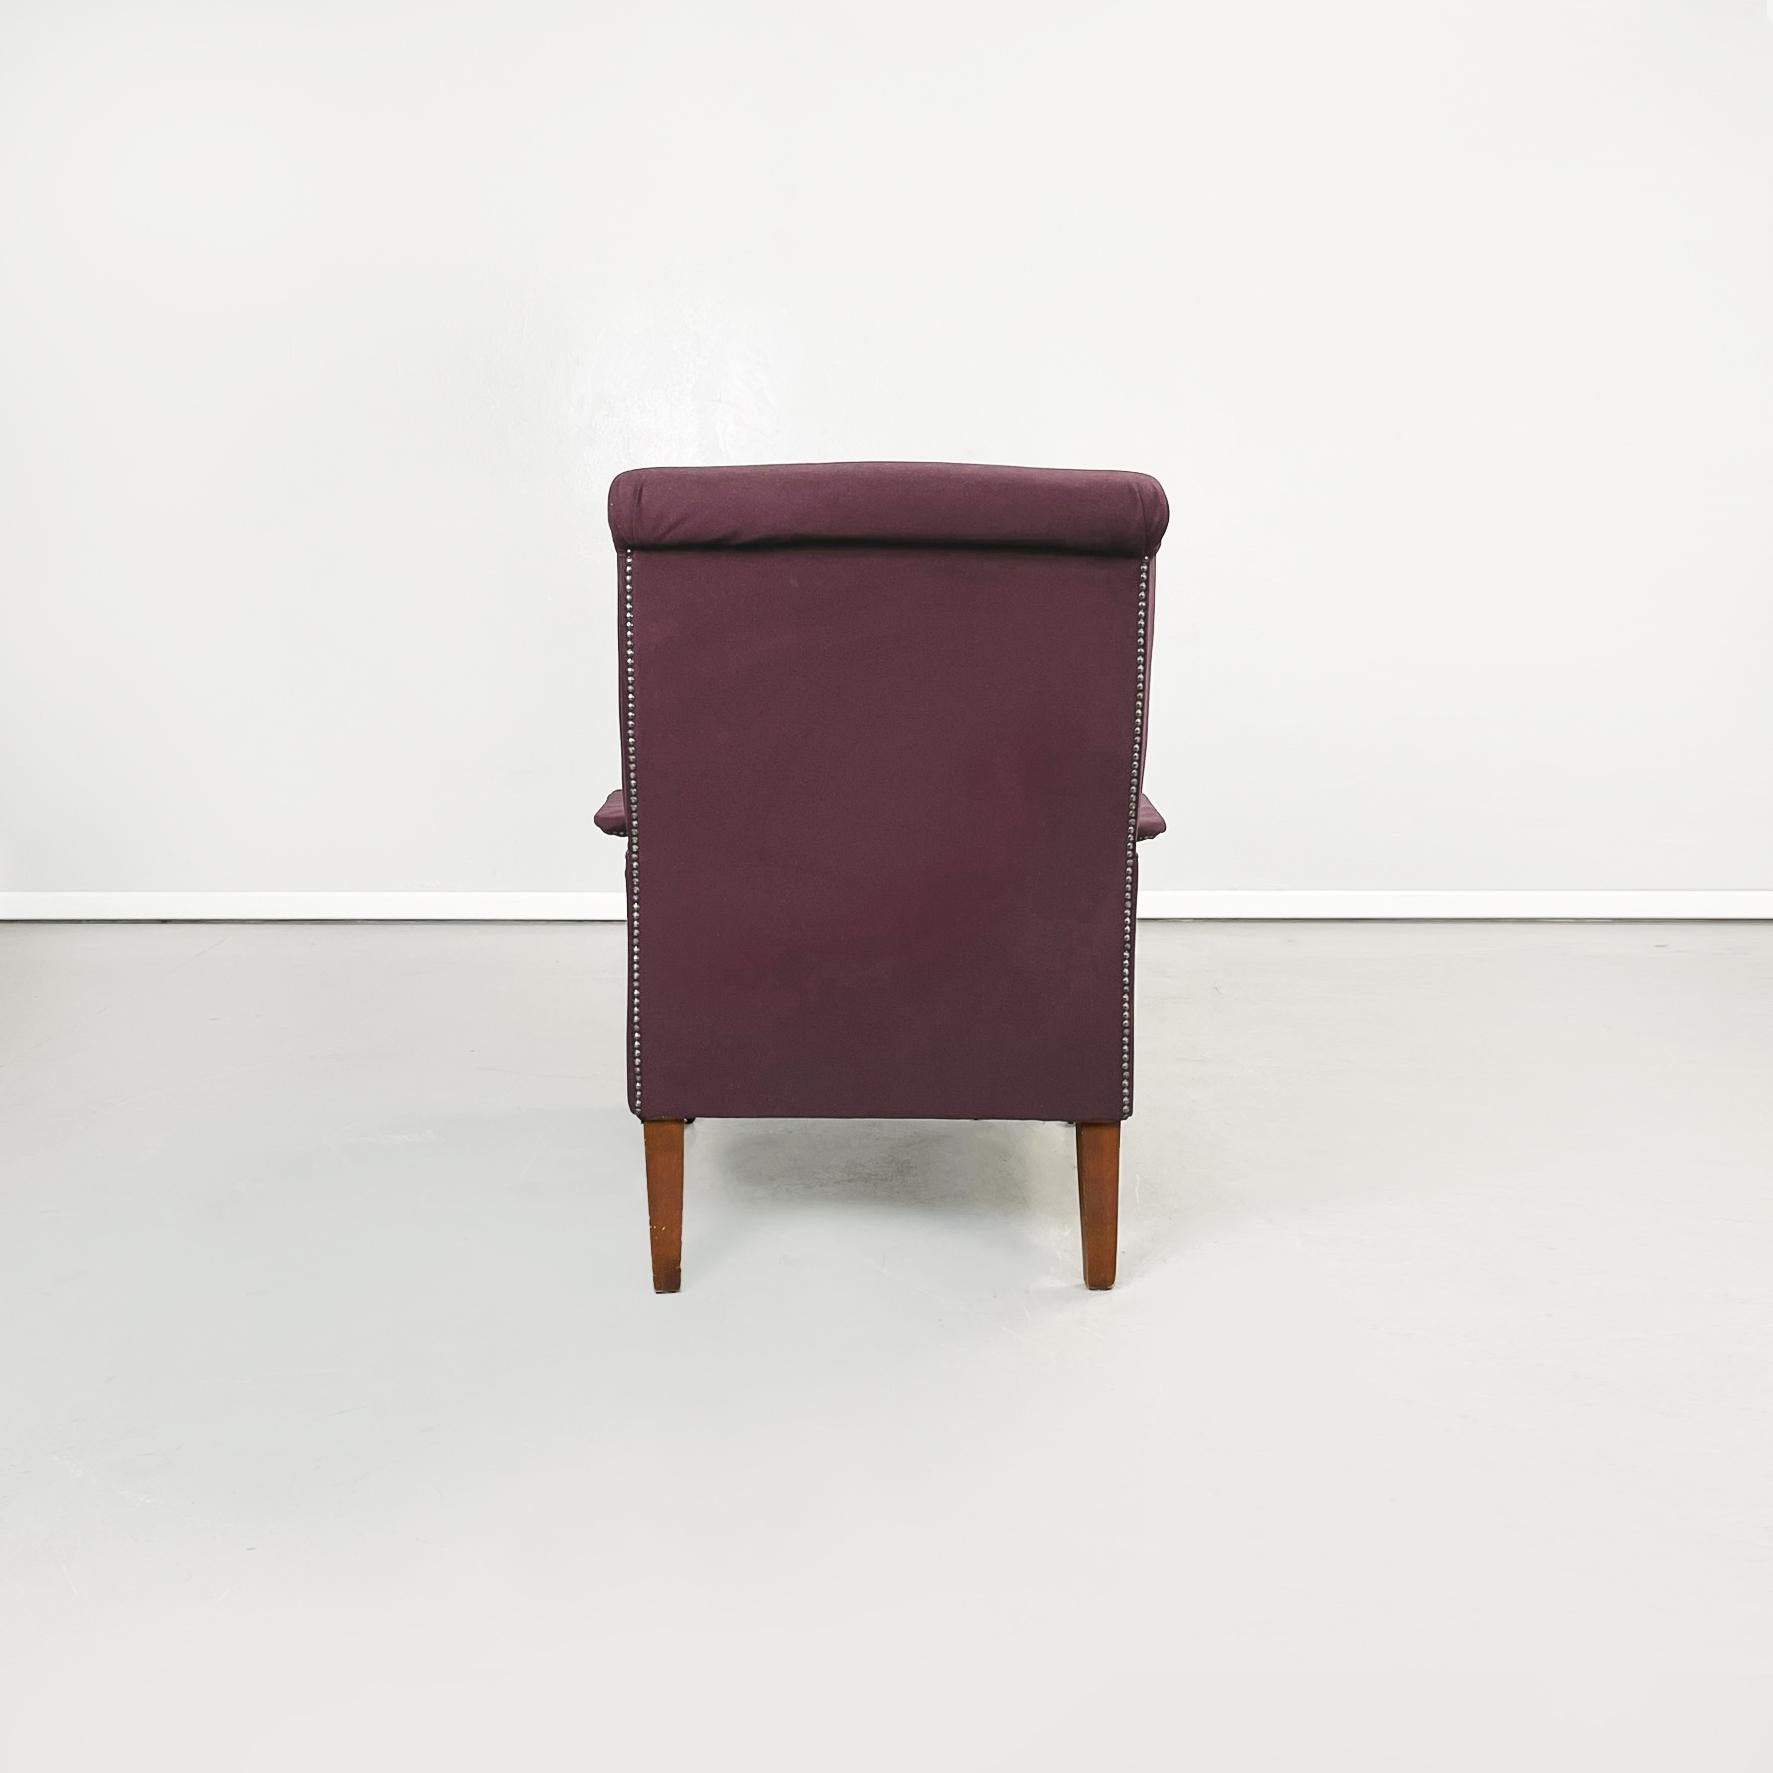 Mid-Century Modern Italian Mid-Century Purple Armchairs ABCD by Caccia Dominioni for Azucena, 1960s For Sale